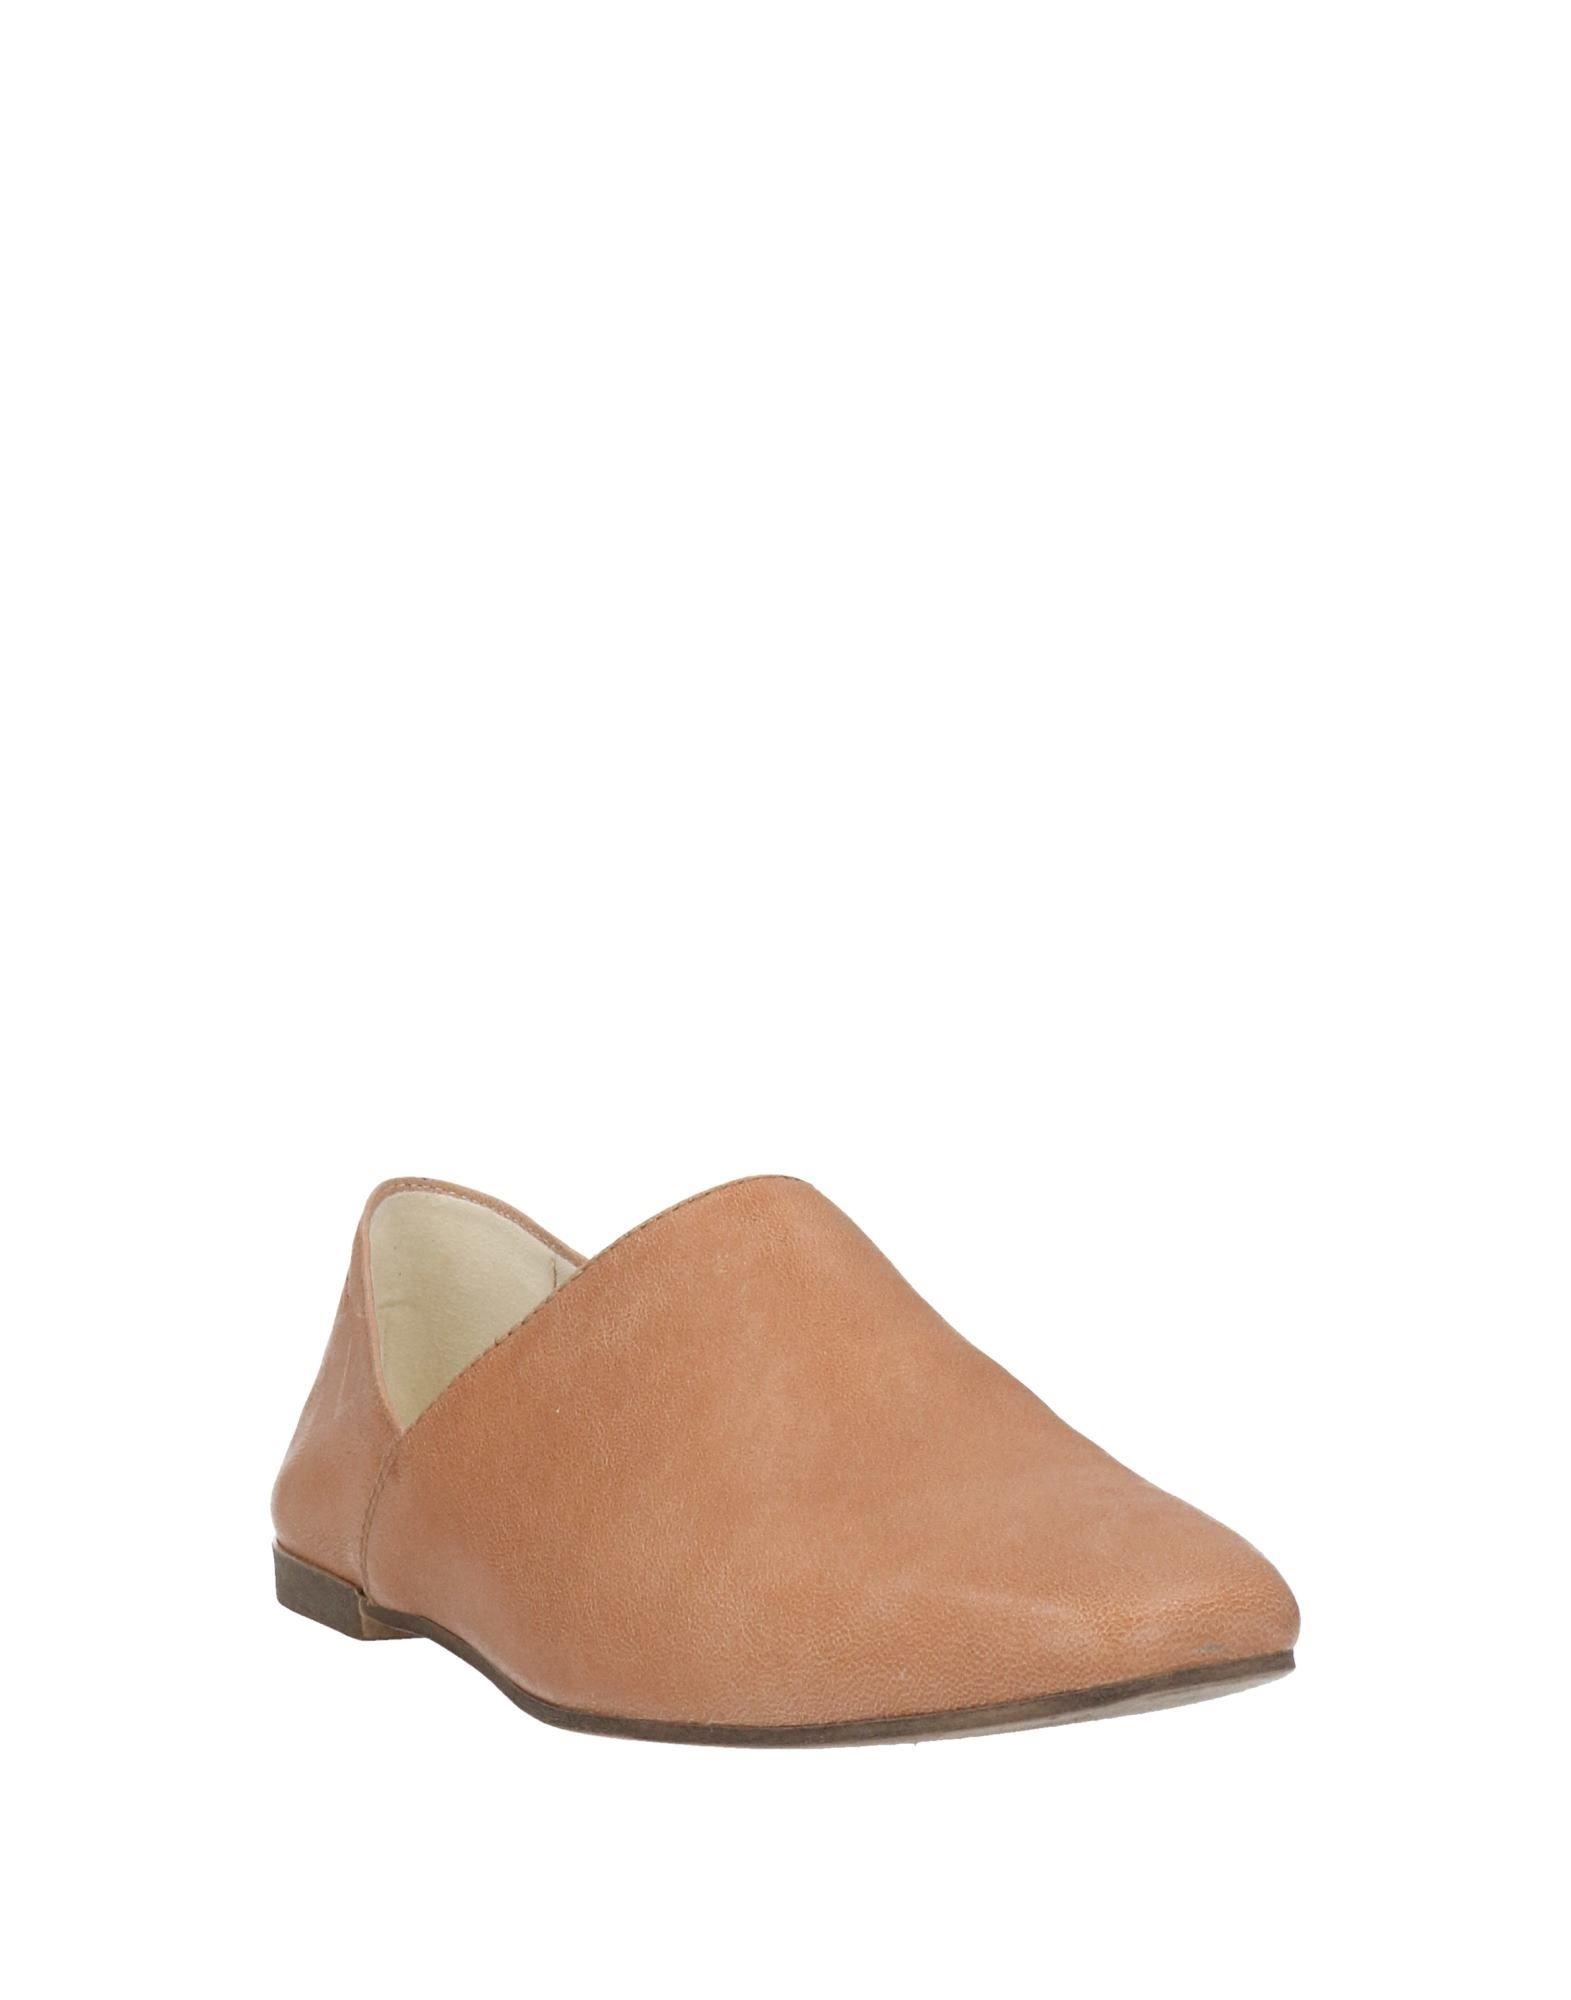 Vagabond Shoemakers Ballet Flats in Brown | Lyst